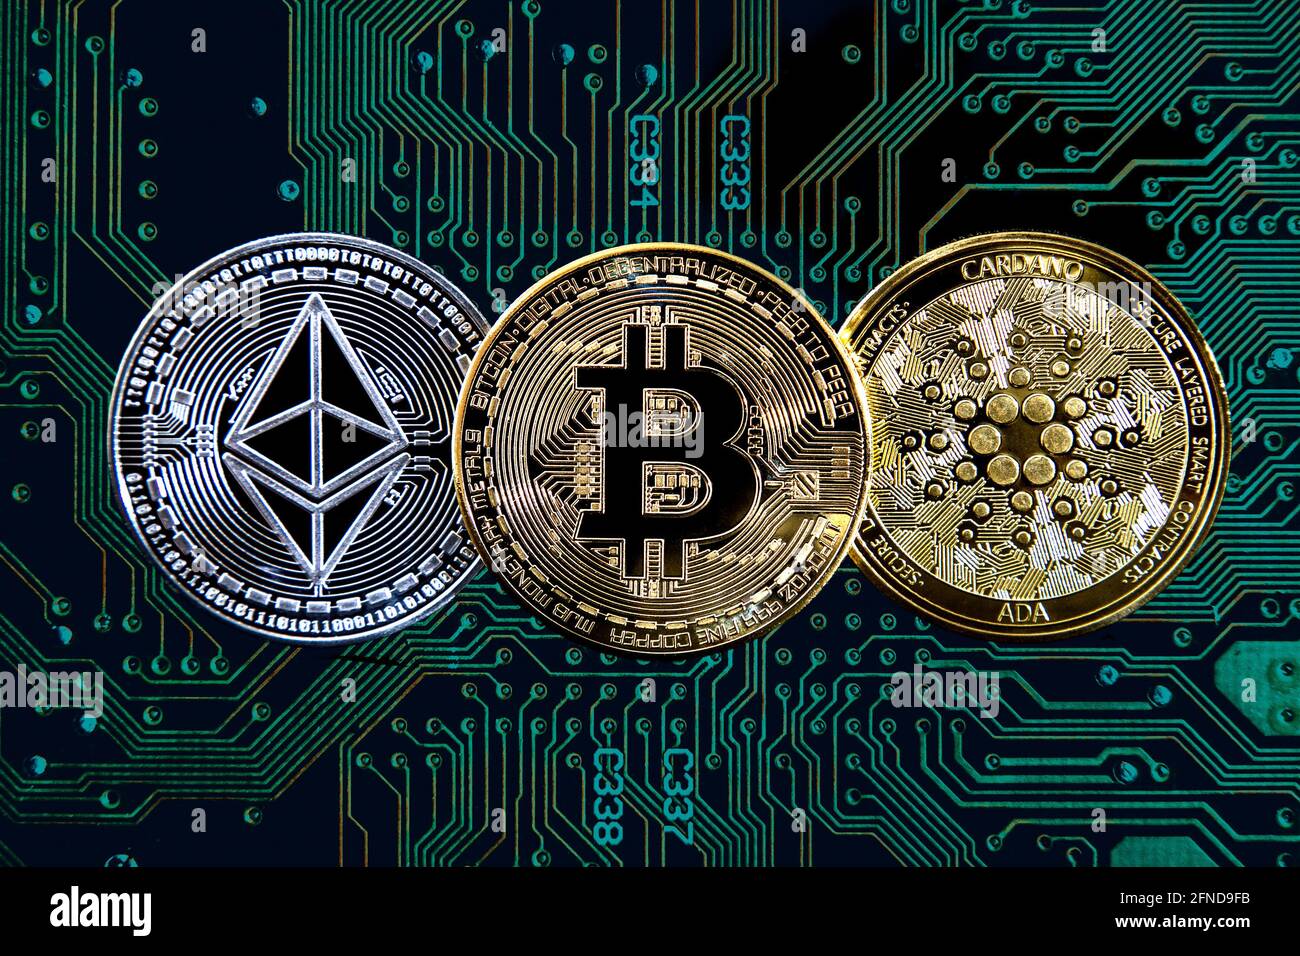 Cardano Coin High Resolution Stock Photography And Images Alamy